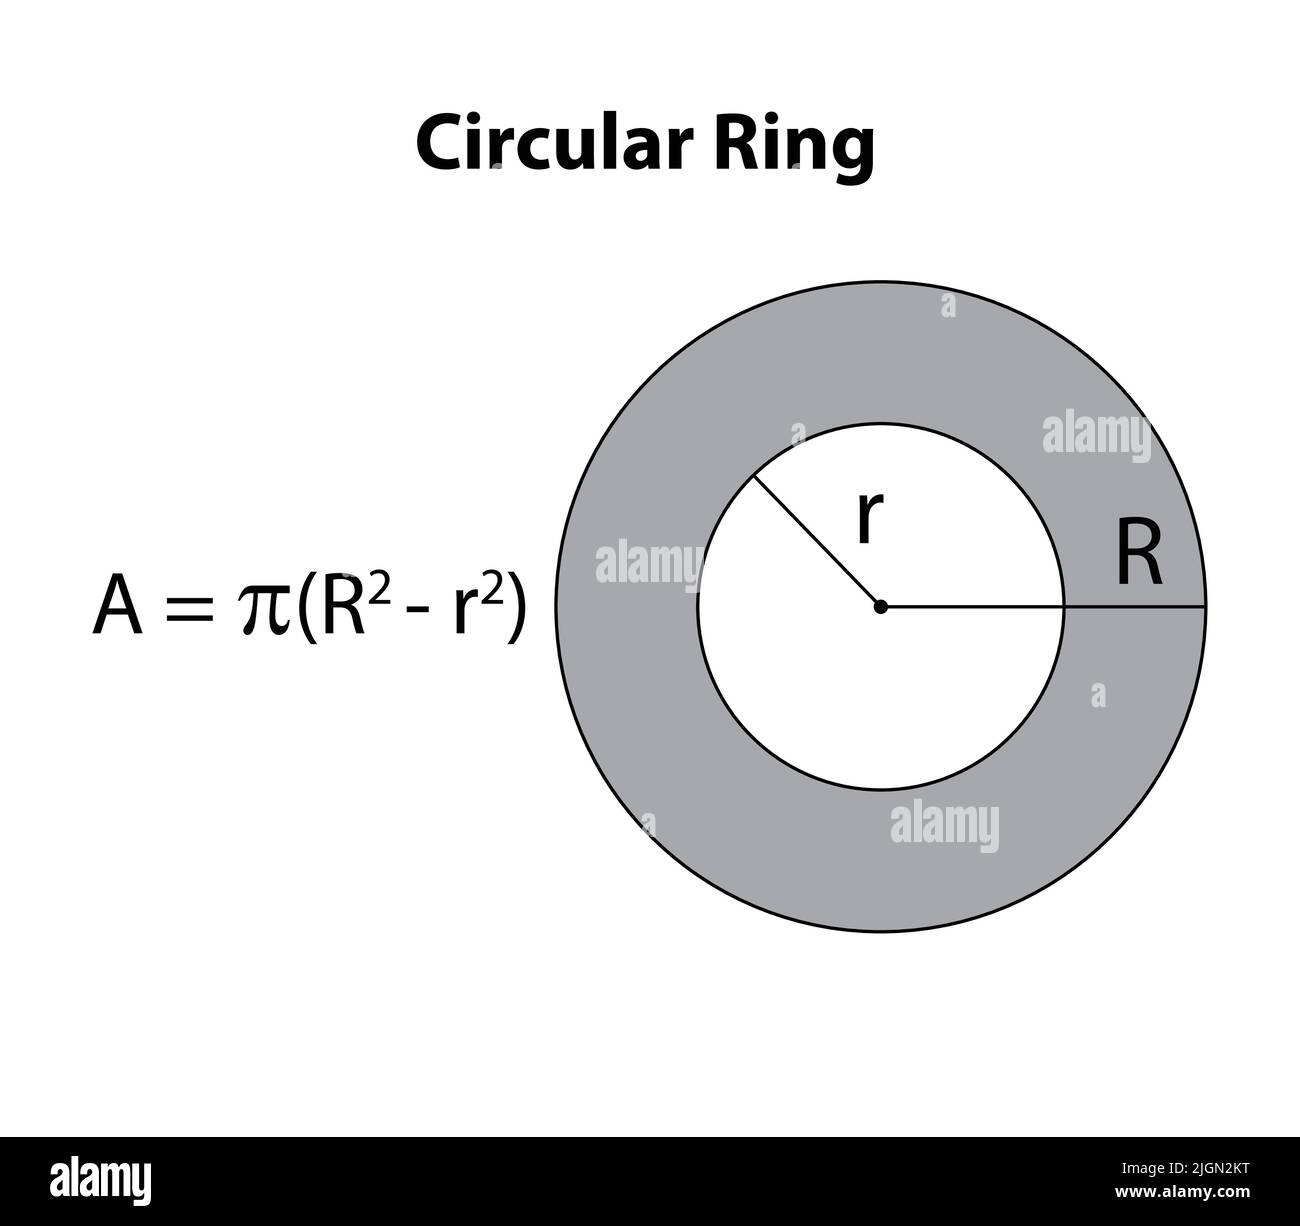 The area of a circular ring is 90 m . If the radius of the outer circle is  7 m, what is the radius of the - Brainly.in